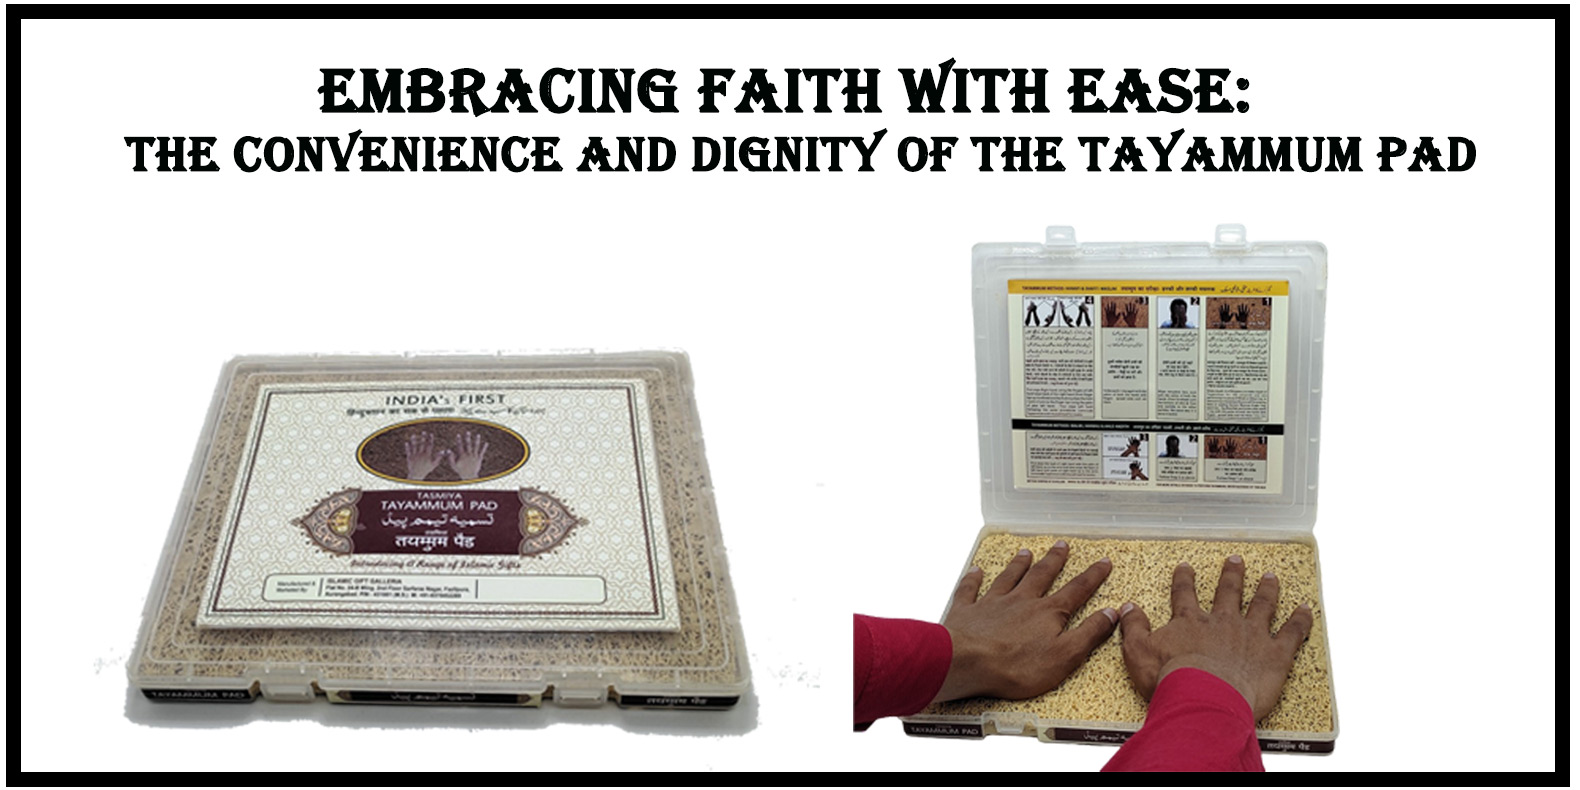 Embracing Faith with Ease: The Convenience and Dignity of the Tayammum Pad